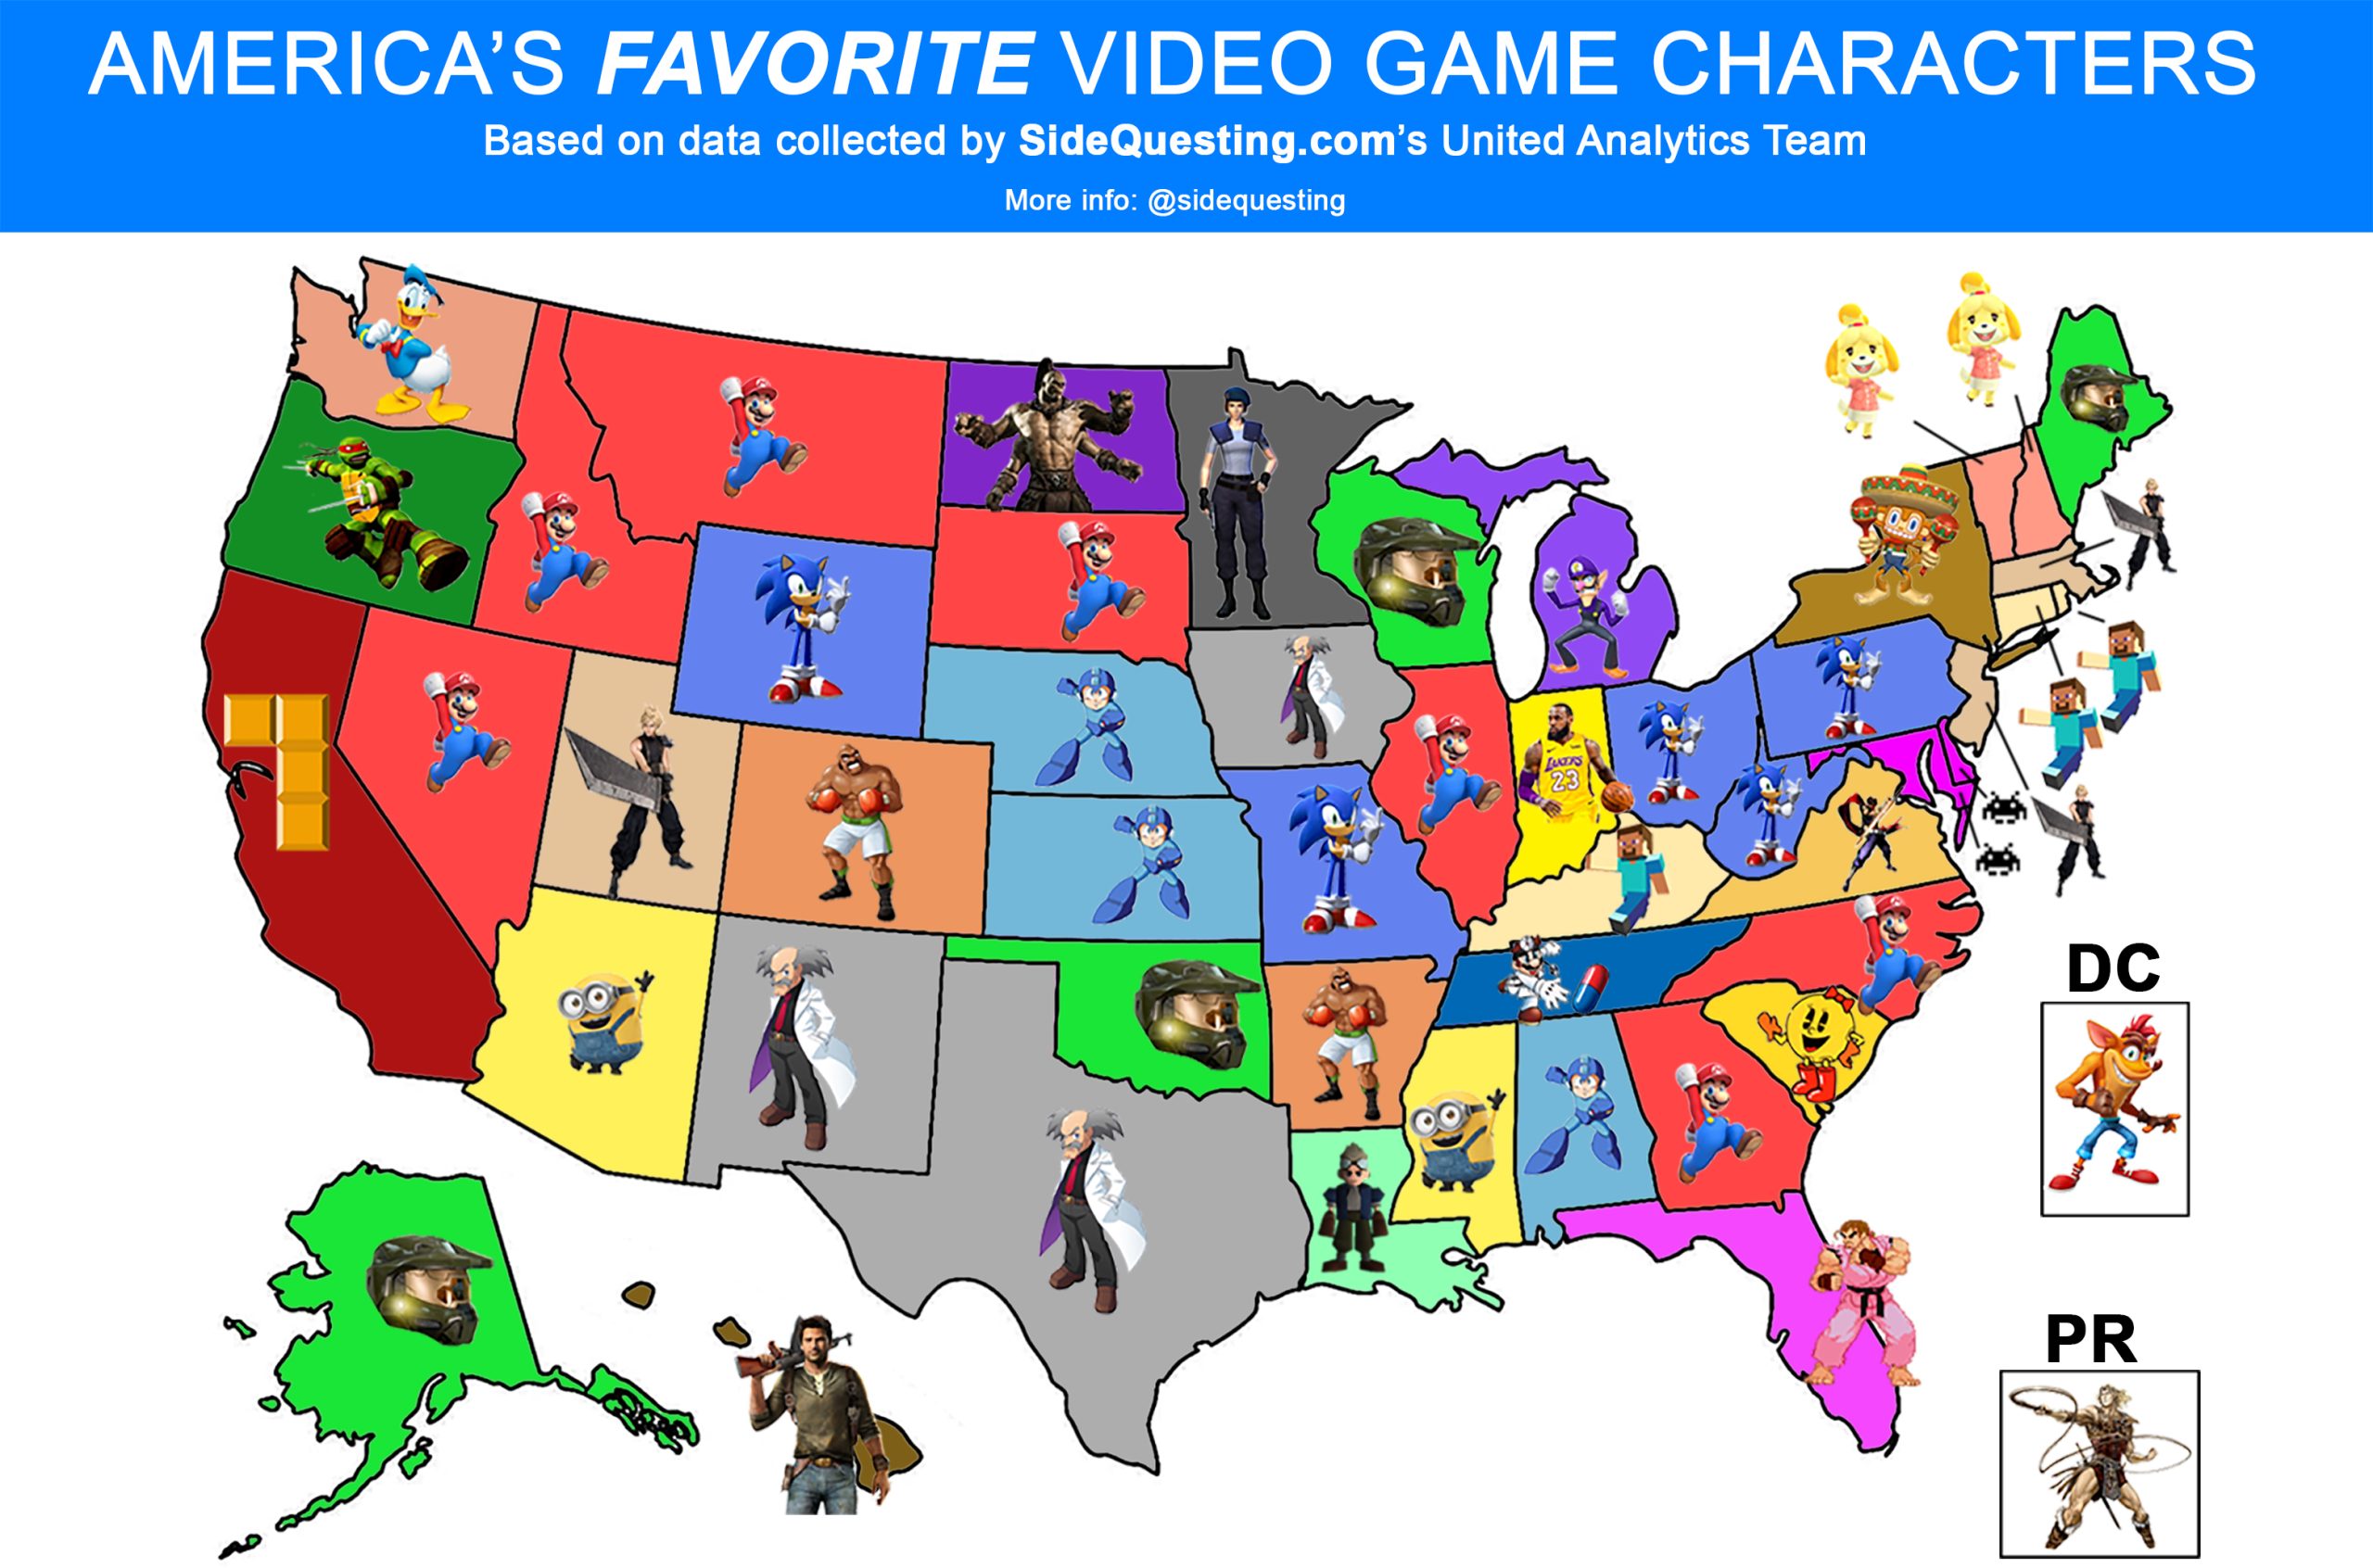 Who are America’s favorite video game characters?